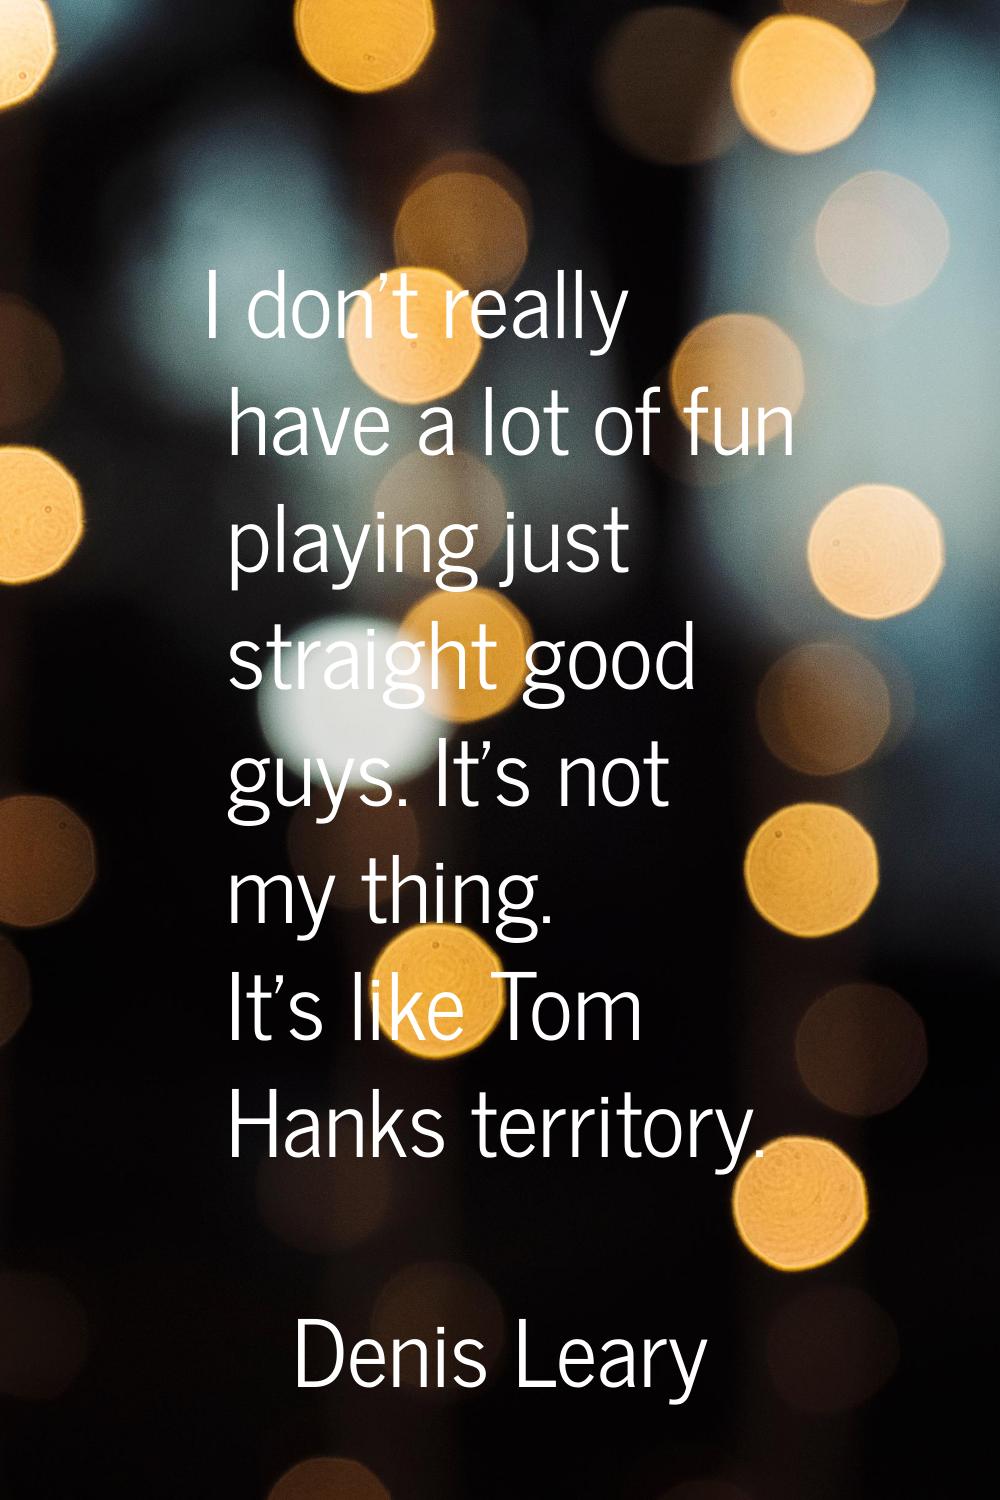 I don't really have a lot of fun playing just straight good guys. It's not my thing. It's like Tom 